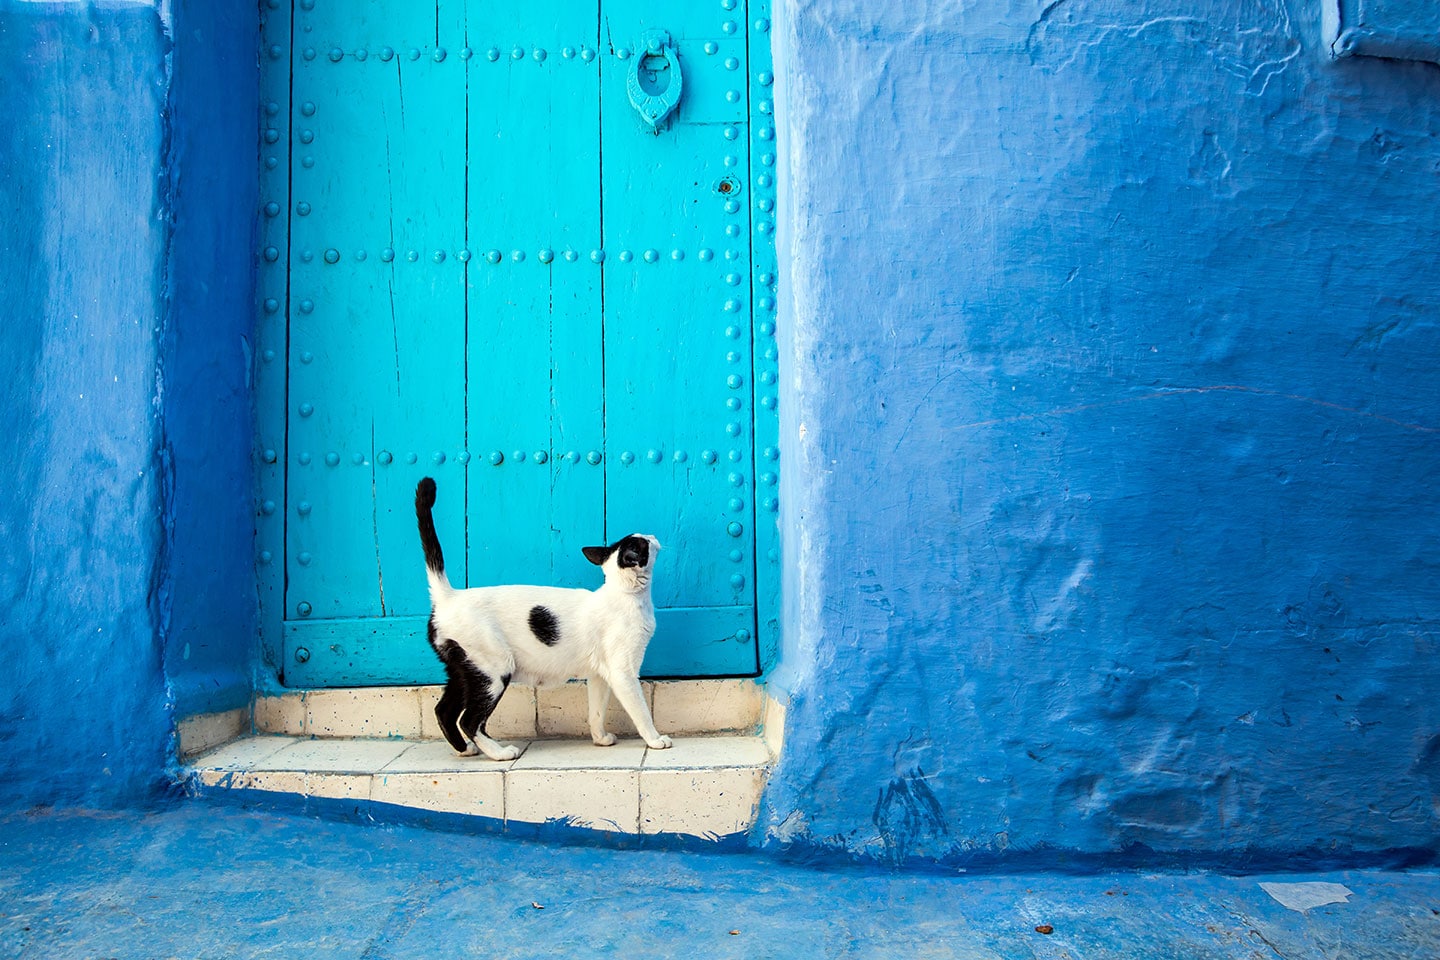 Travel photography in Chefchaouen, Morocco